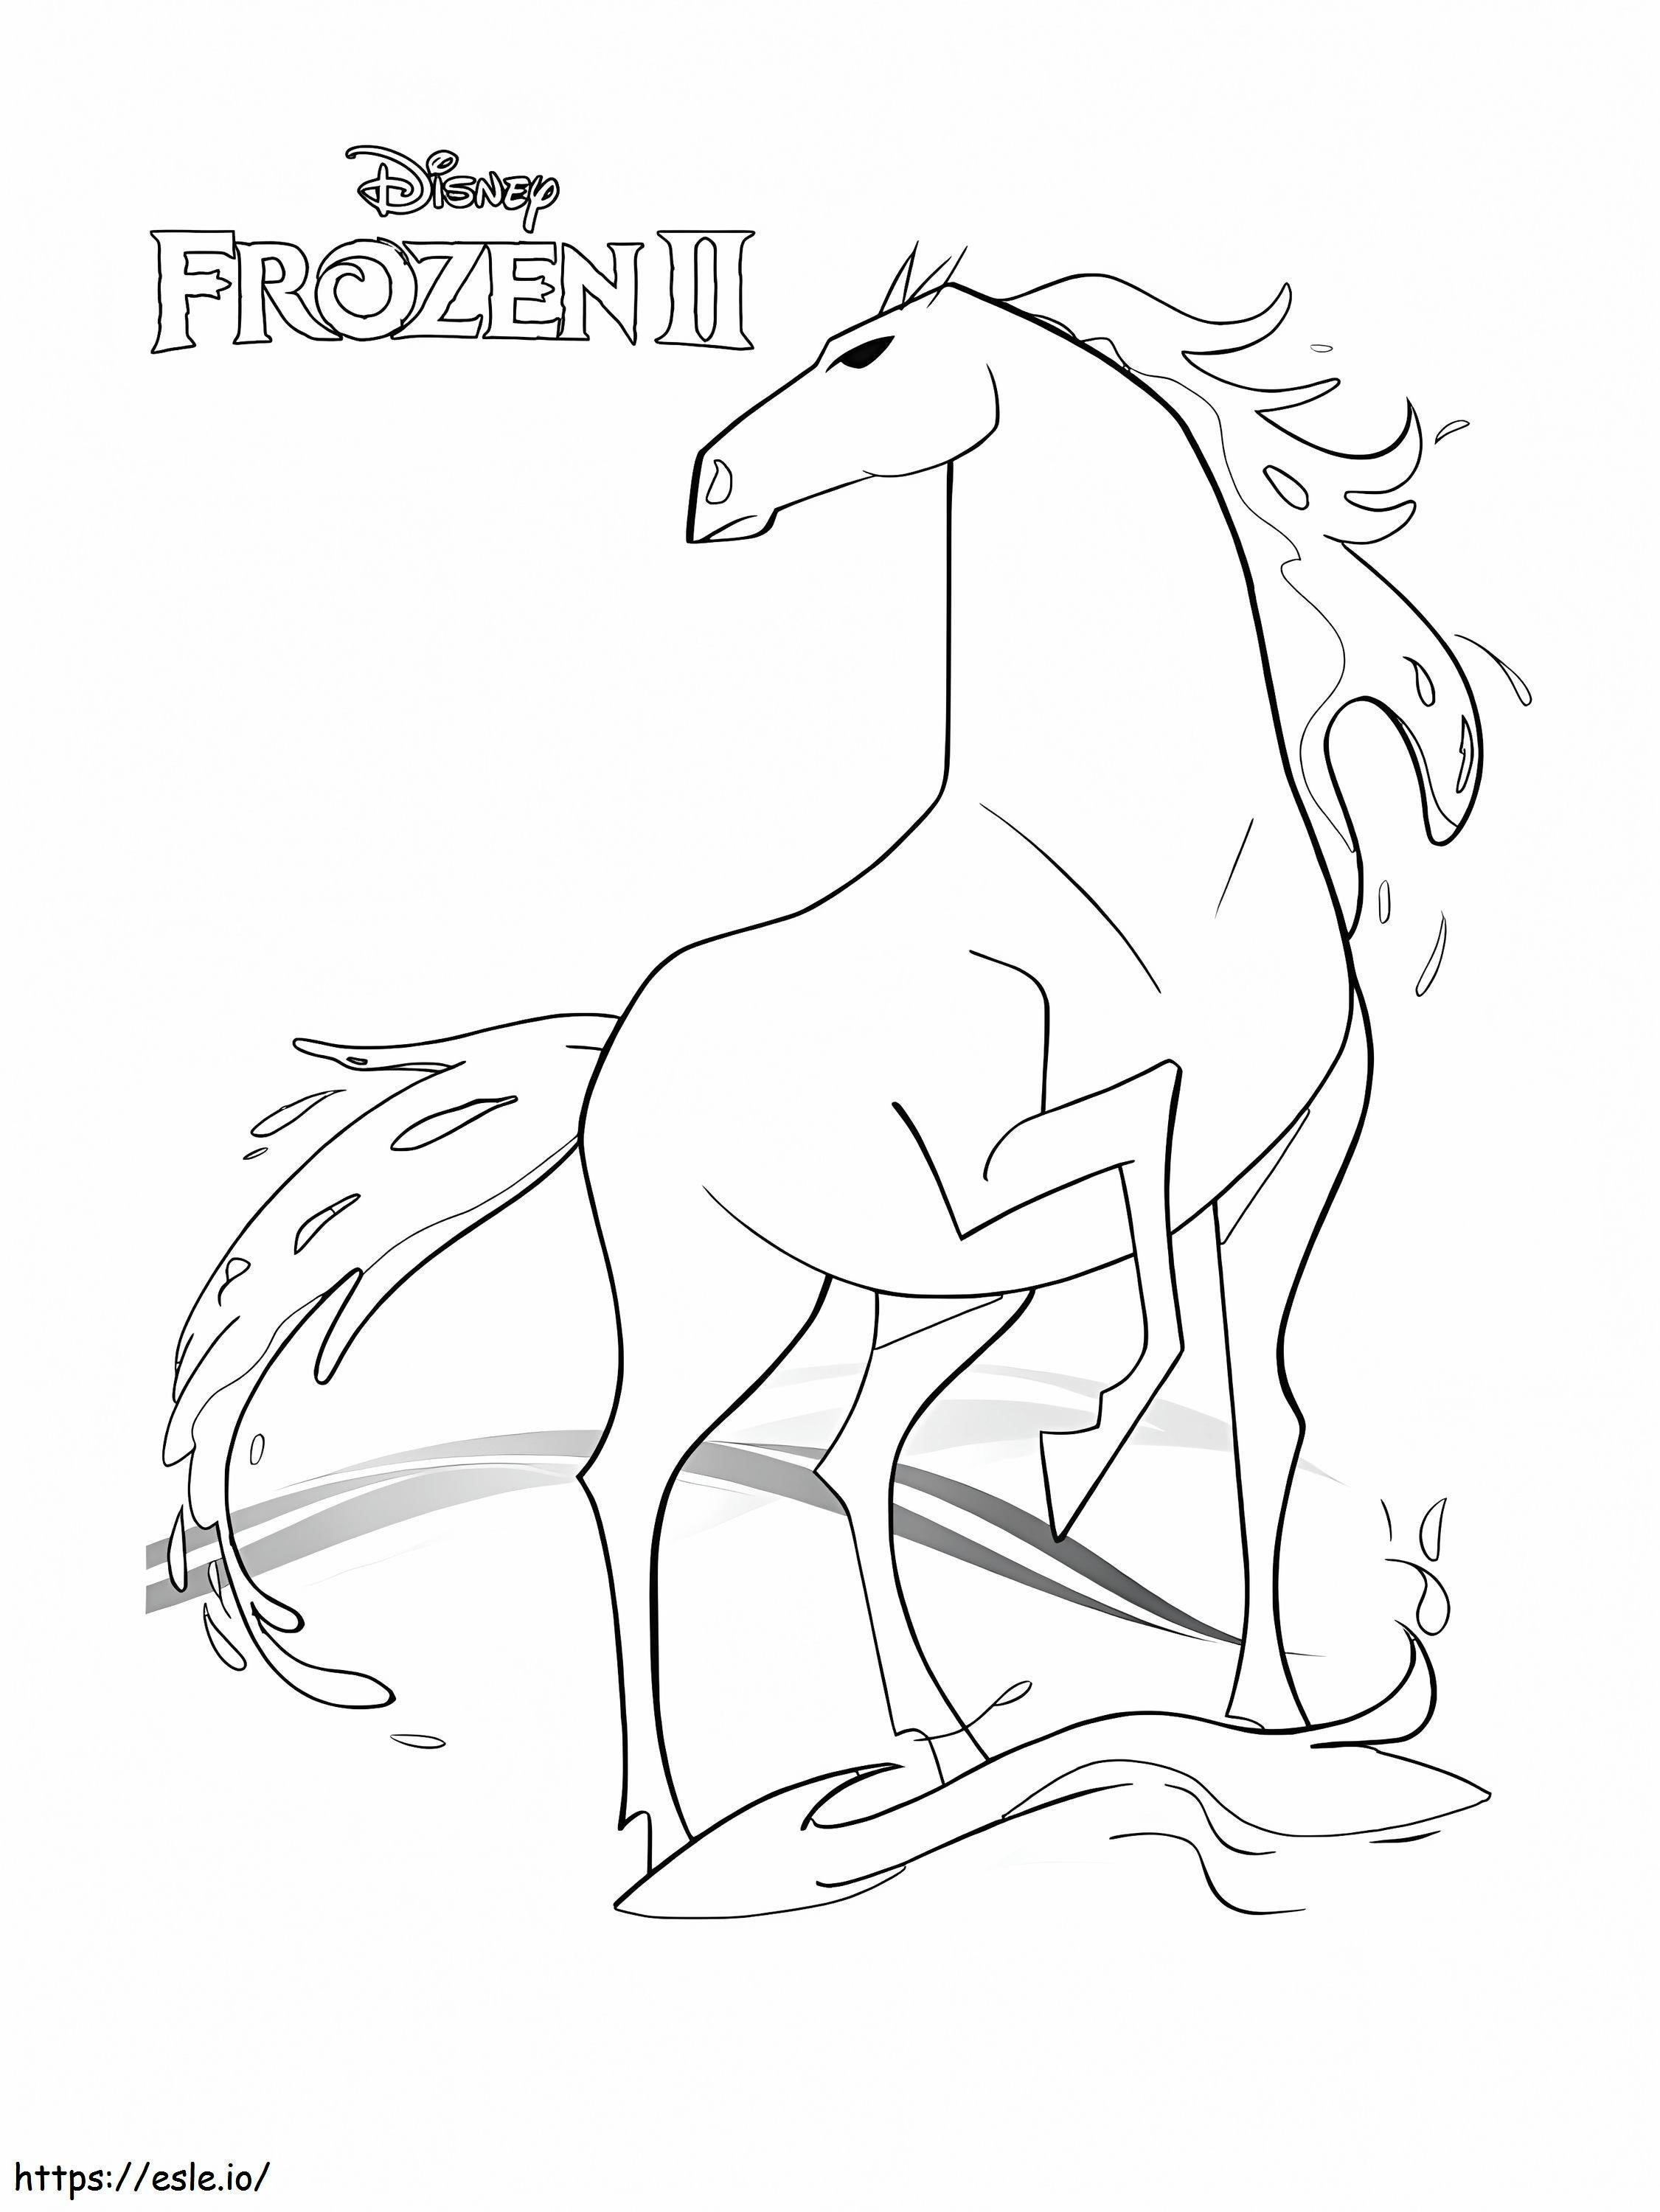 Probably Frozen 2 Coloring Page coloring page